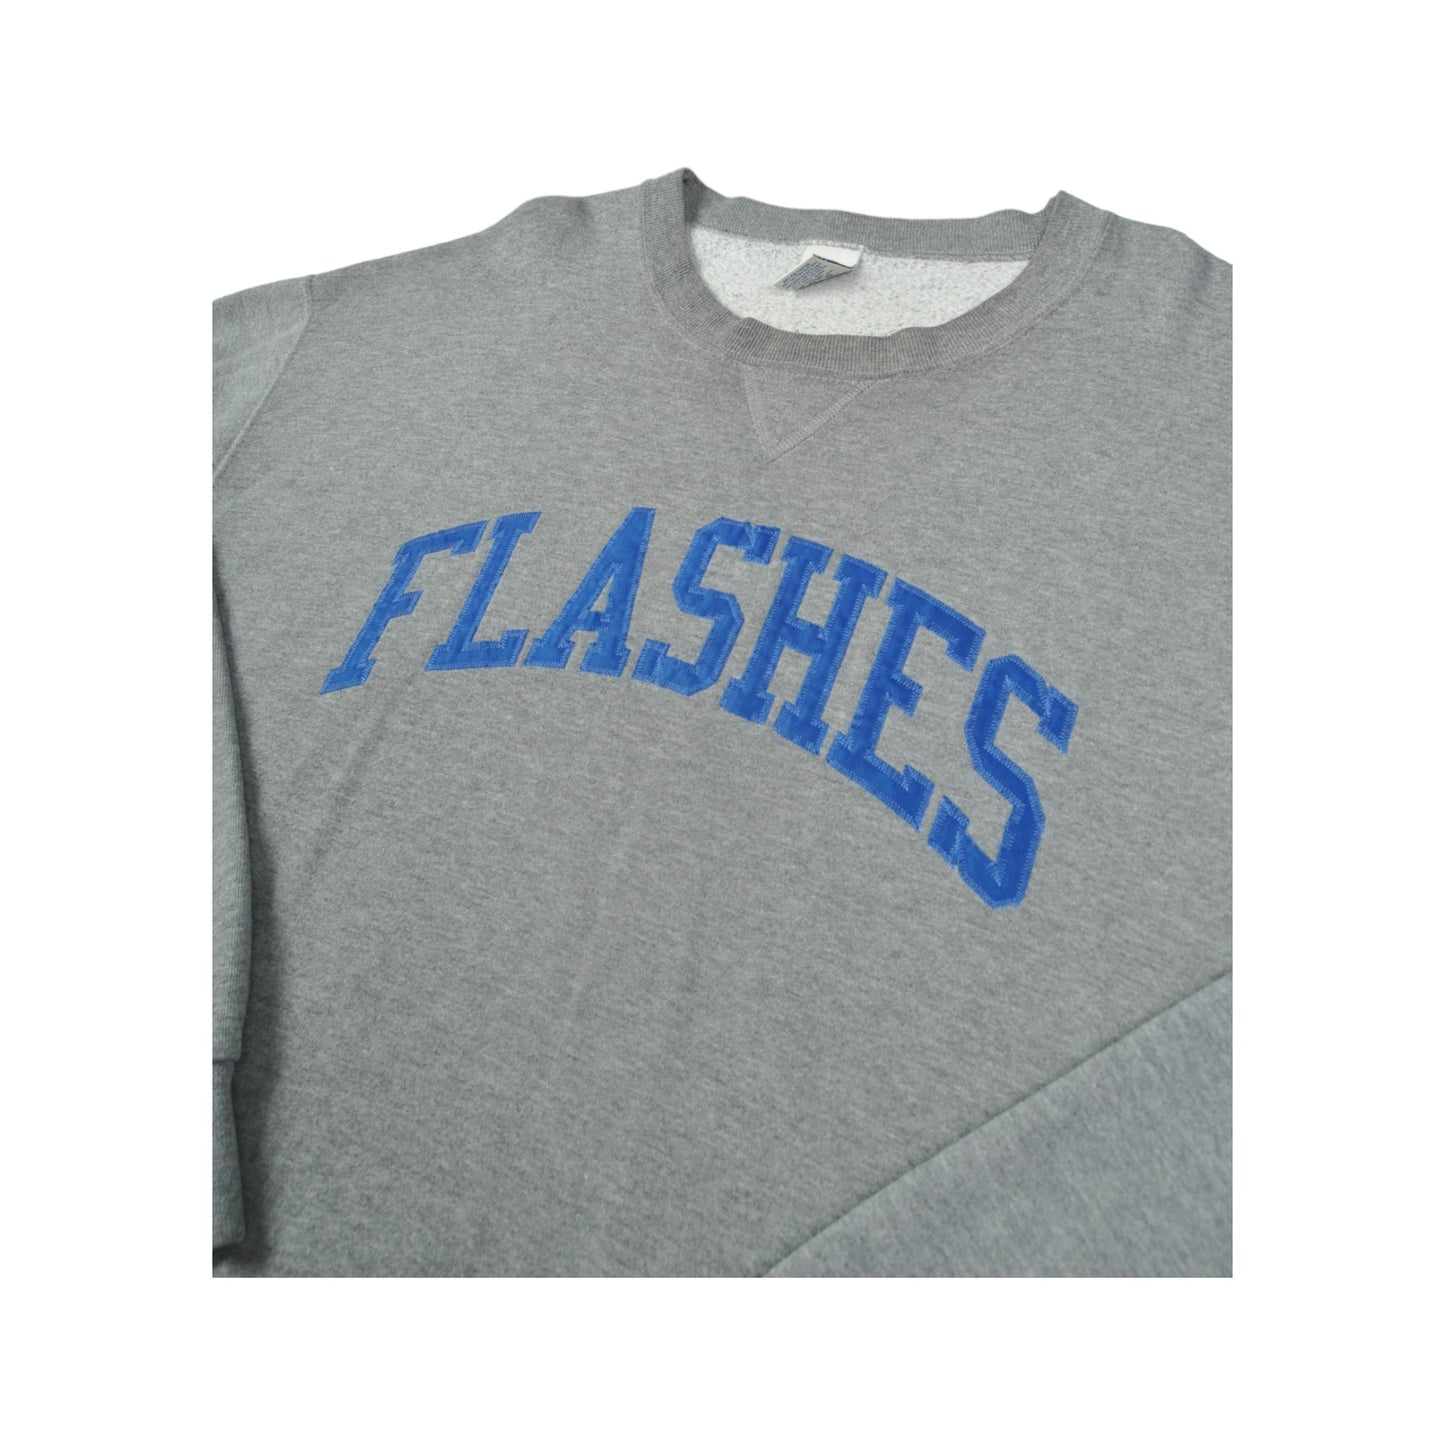 Vintage Russel Athletic Flashes Sweater Grey XL